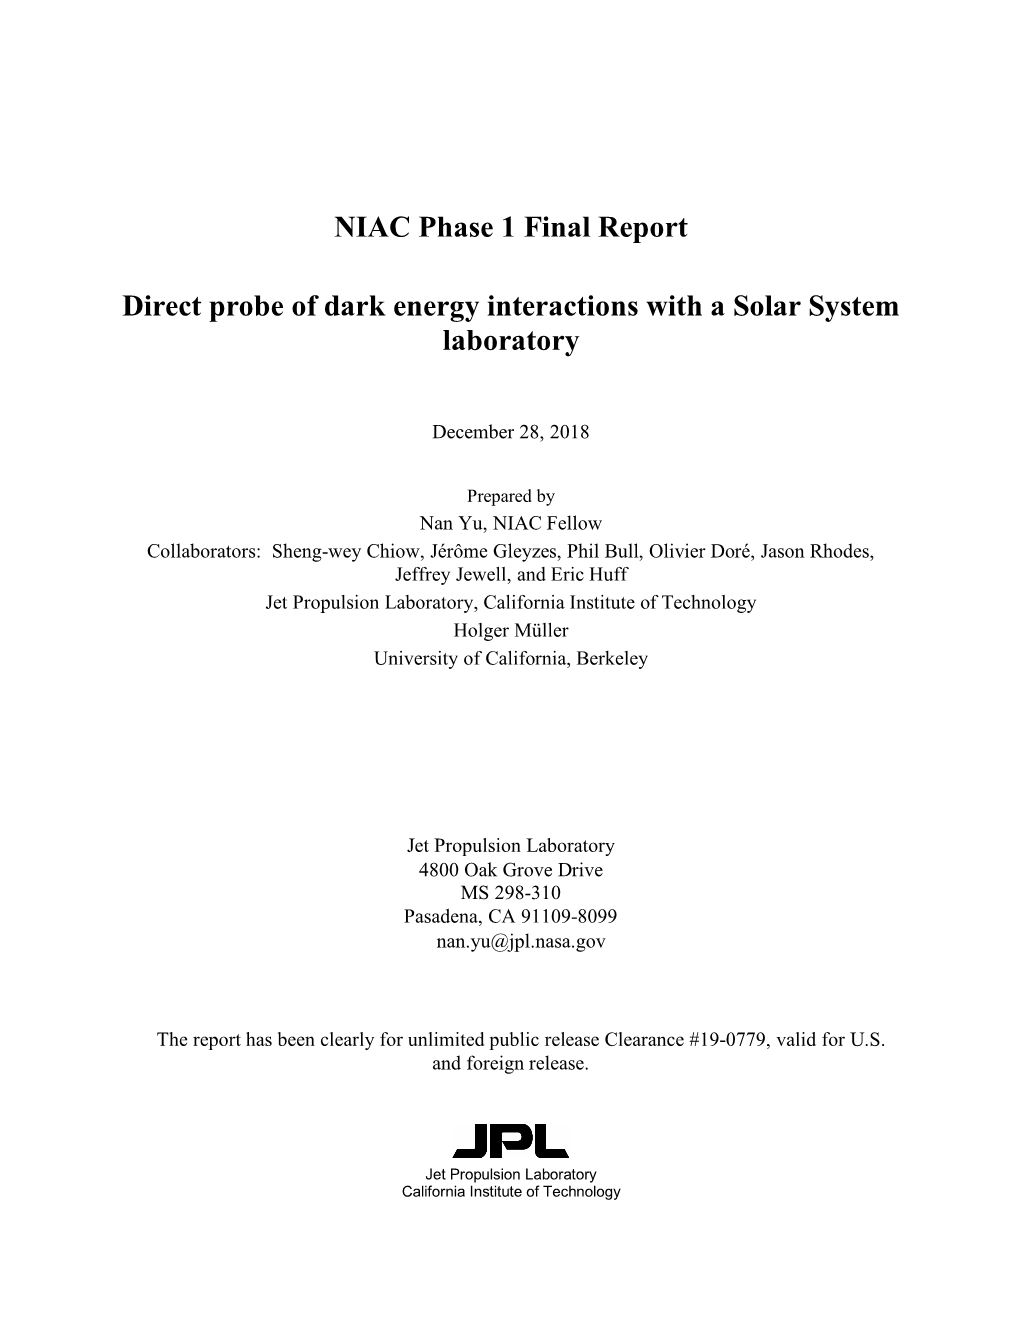 NIAC Phase 1 Final Report Direct Probe of Dark Energy Interactions with a Solar System Laboratory